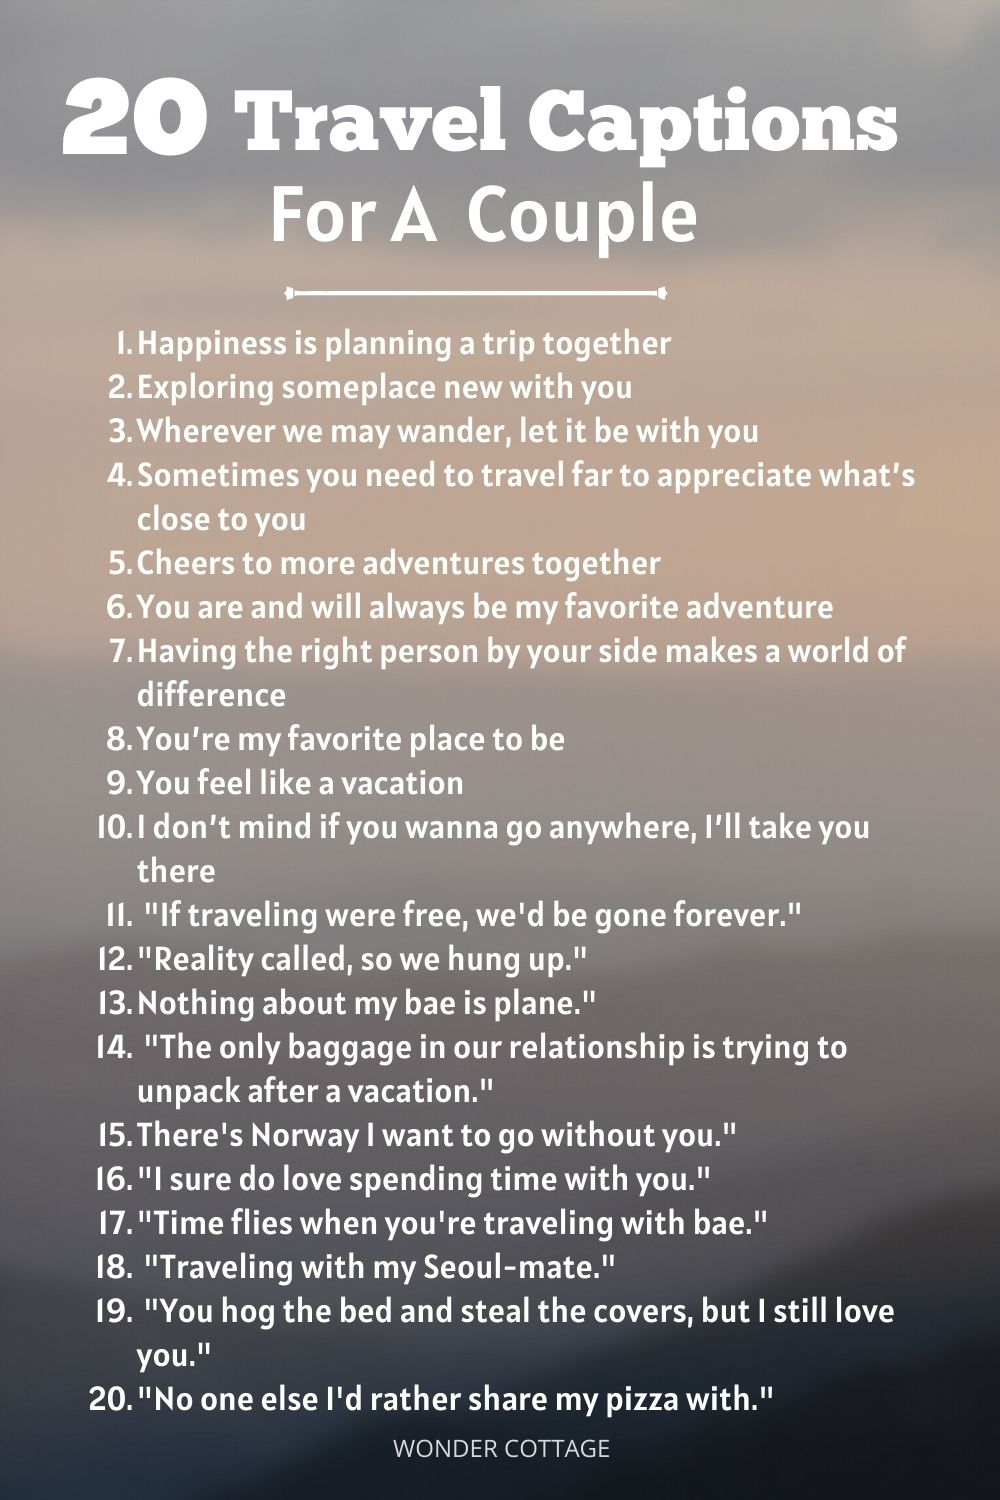 Travel captions for a couple